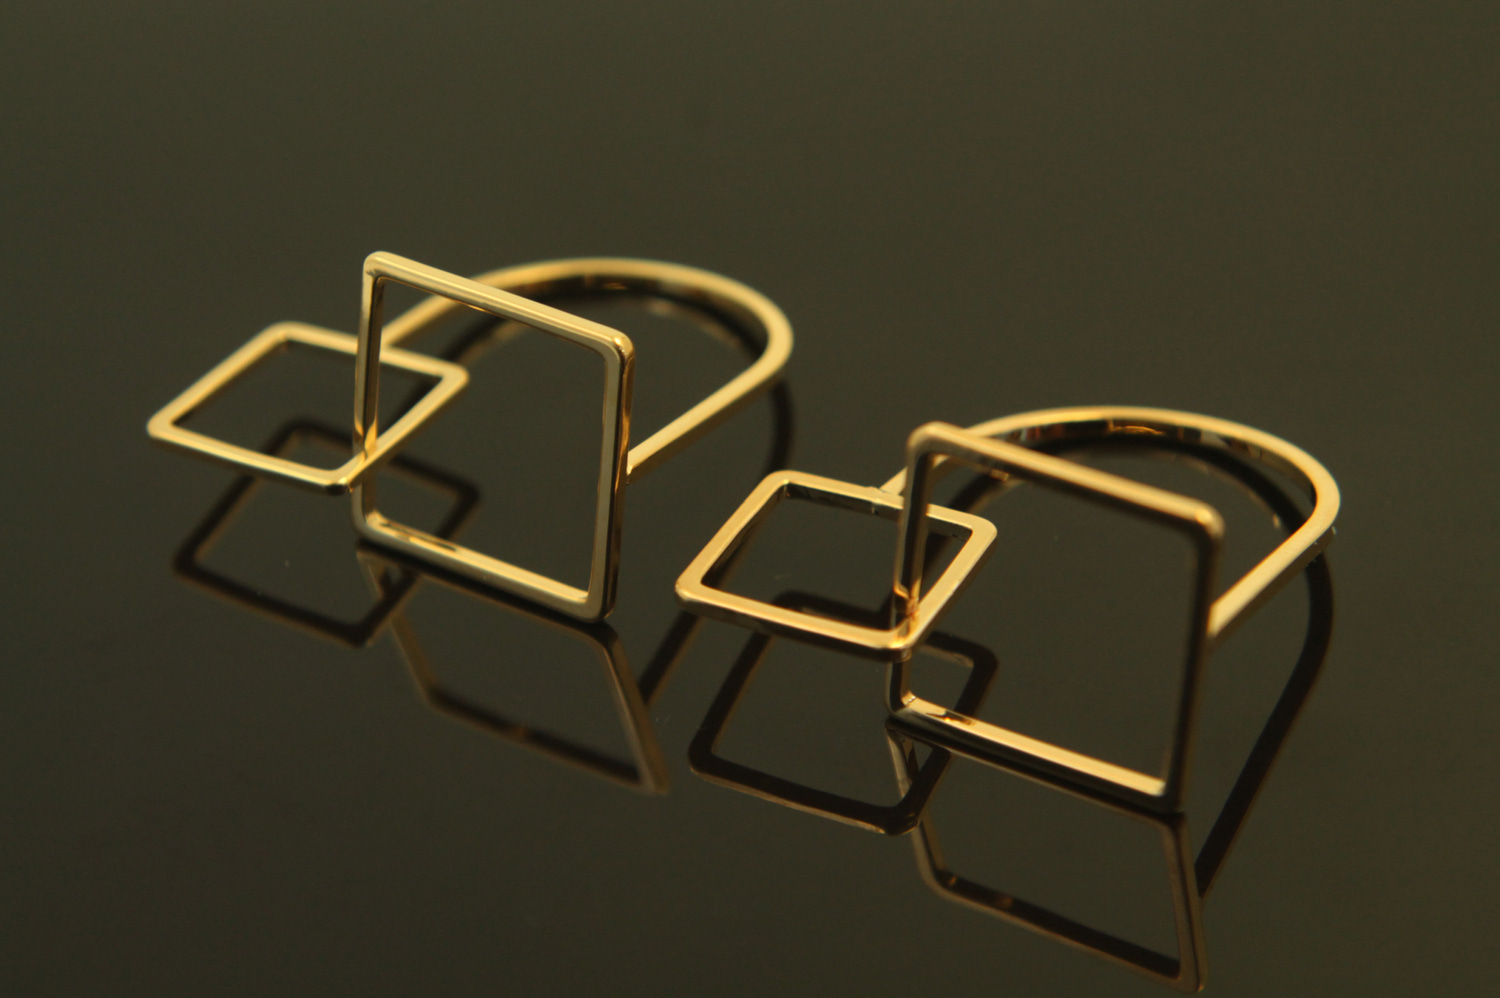 [T59-G1]Double Square Ring, Nickel Free, 1pc, 28x25mm, 16K Gold Plated Brass, Geometric Ring, Geometric Pendant, Gold Rings, Wire Rings